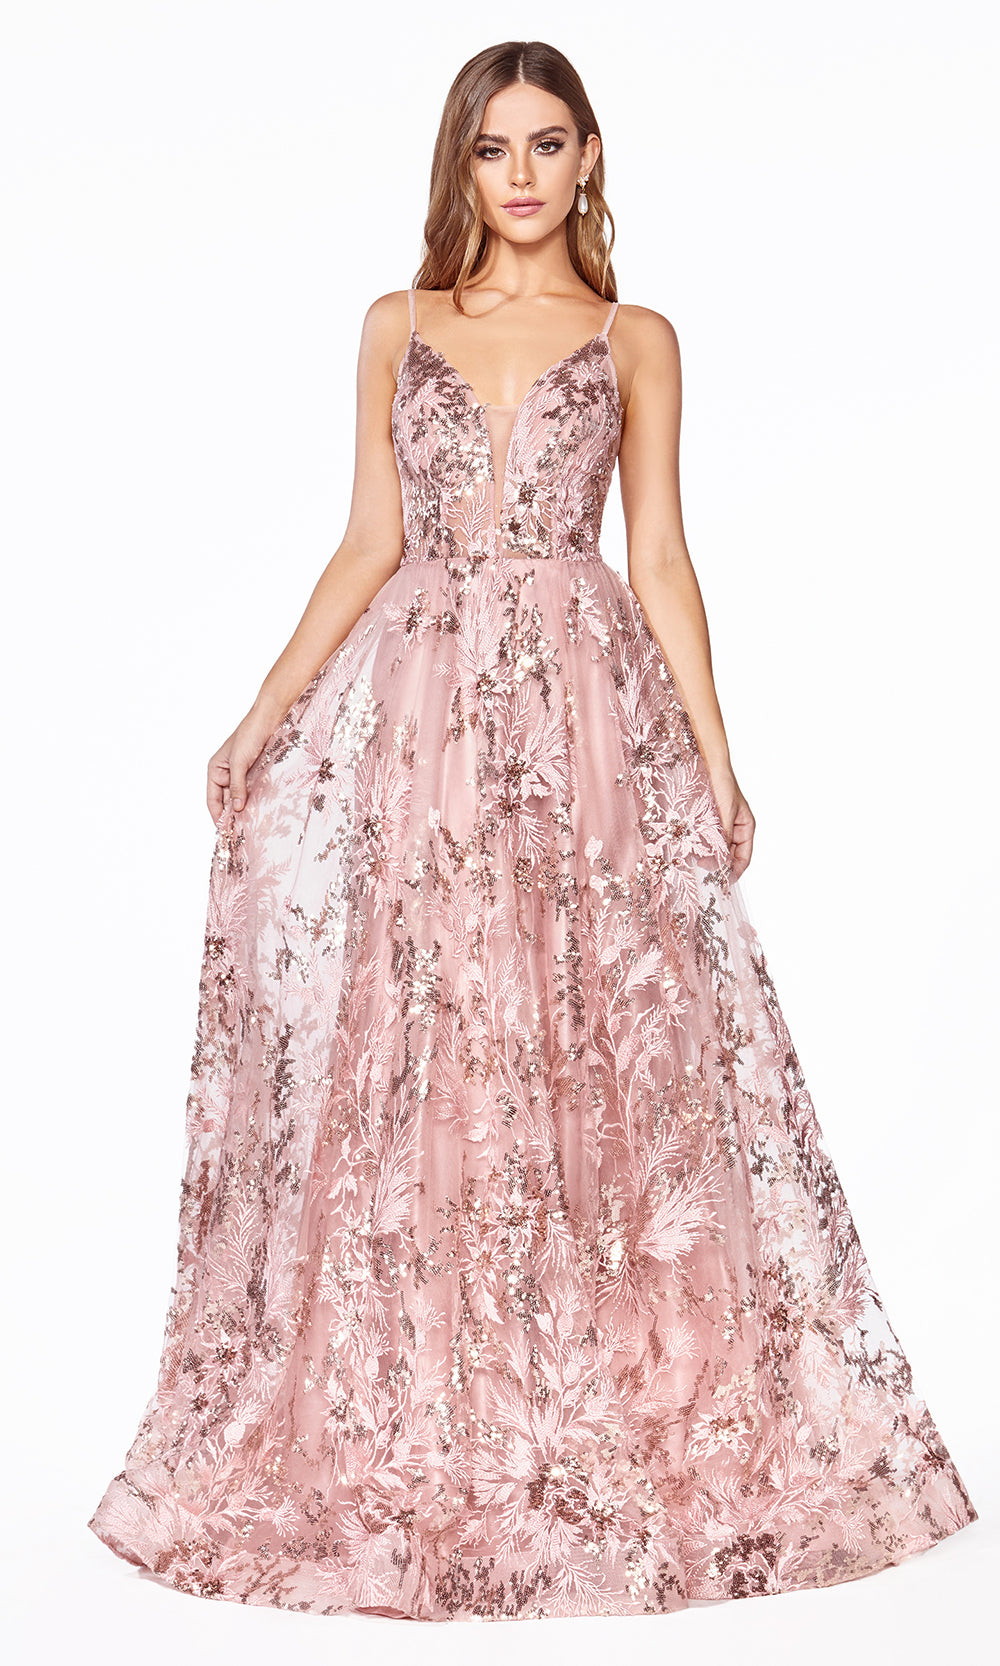 Cinderella Divine CB048 long rose gold flowy v neck glittery dress w/ tulle skirt & straps. Rose gold dress is perfect for black tie event, prom, indowestern gown, wedding reception/engagement dress, formal wedding guest dress. Plus sizes avail